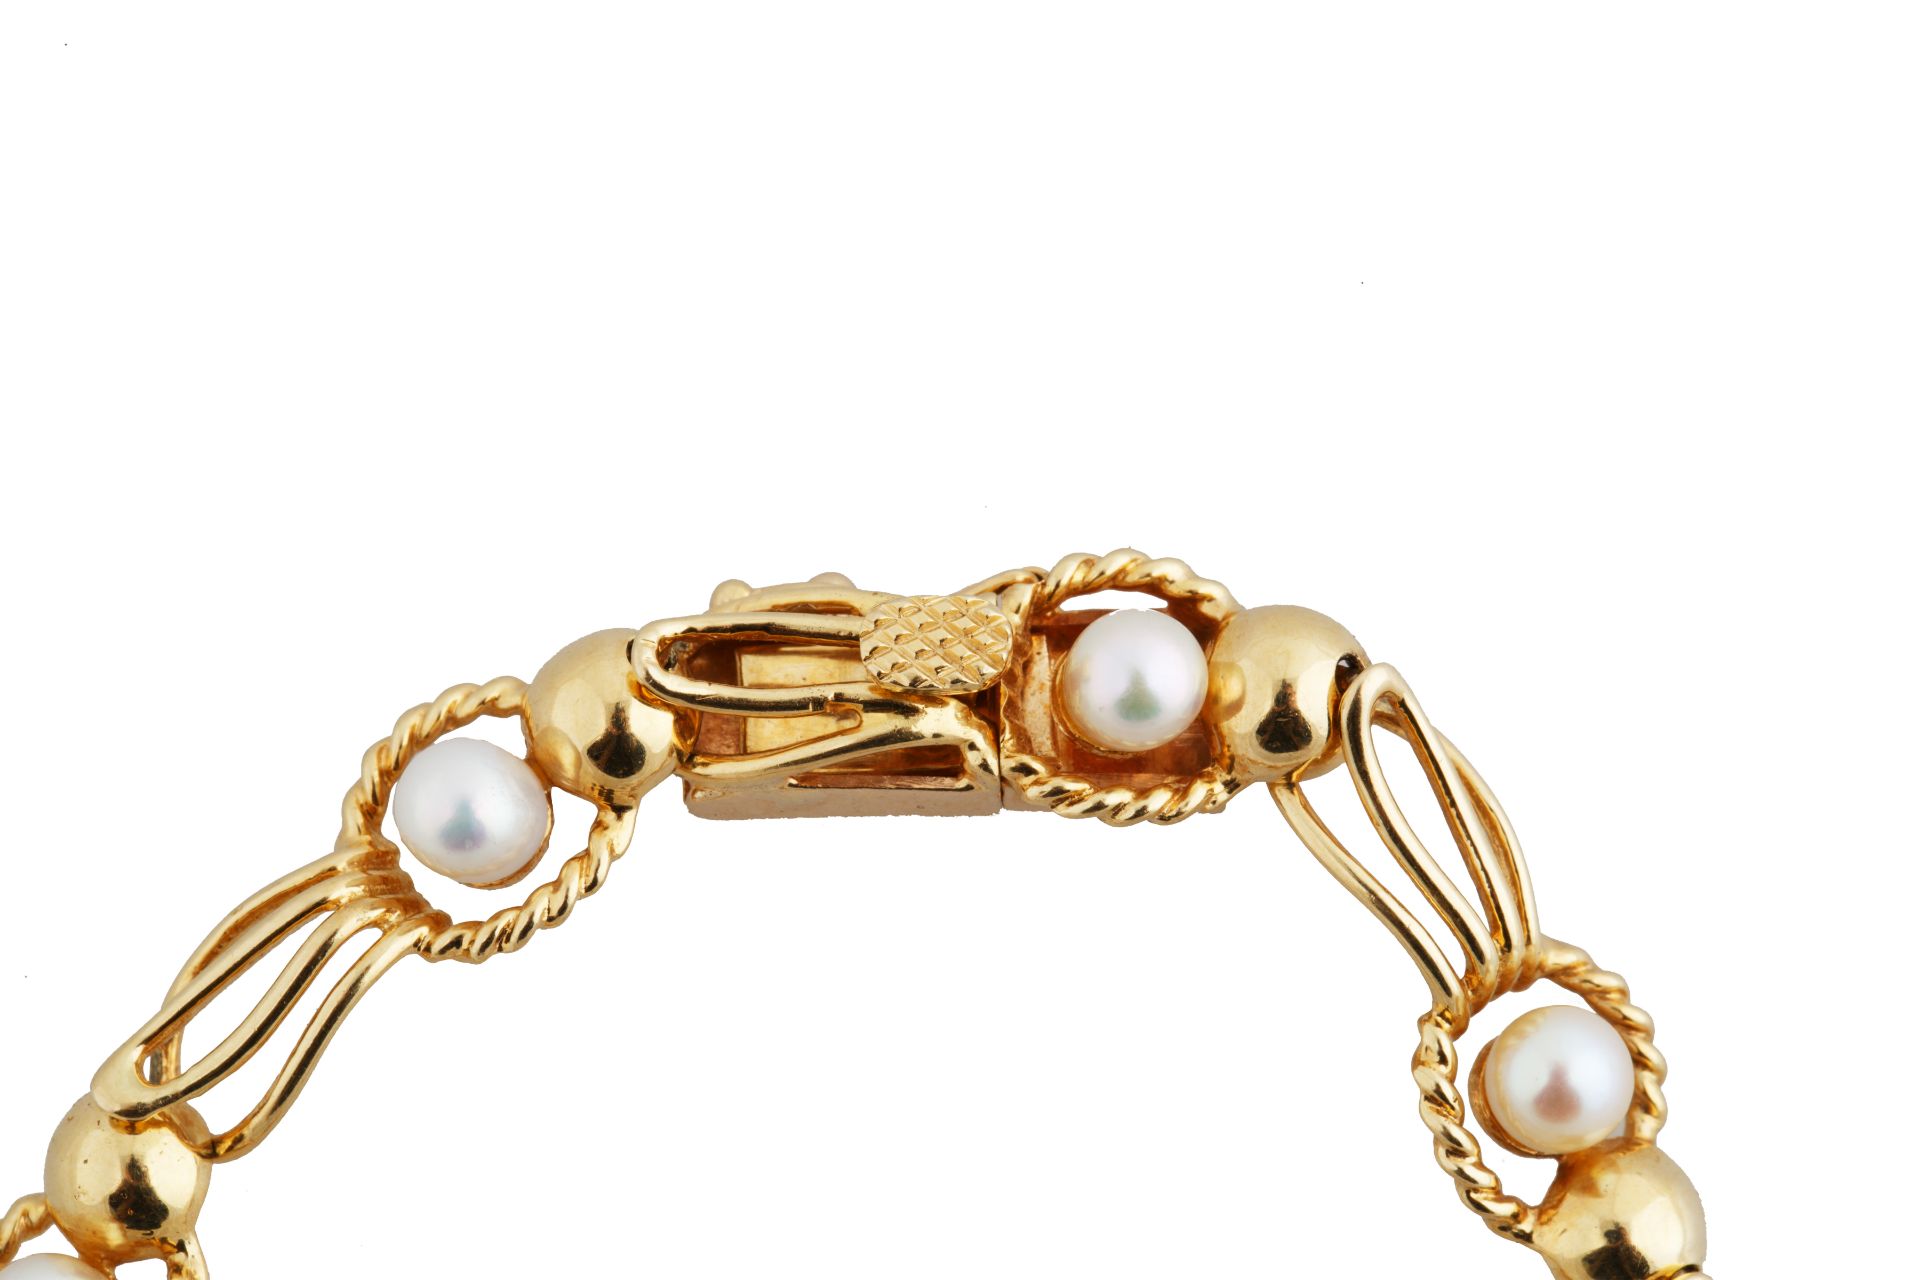 PEARL AND 18KT GOLD BRACELET AND NECKLACE SET - Image 6 of 8